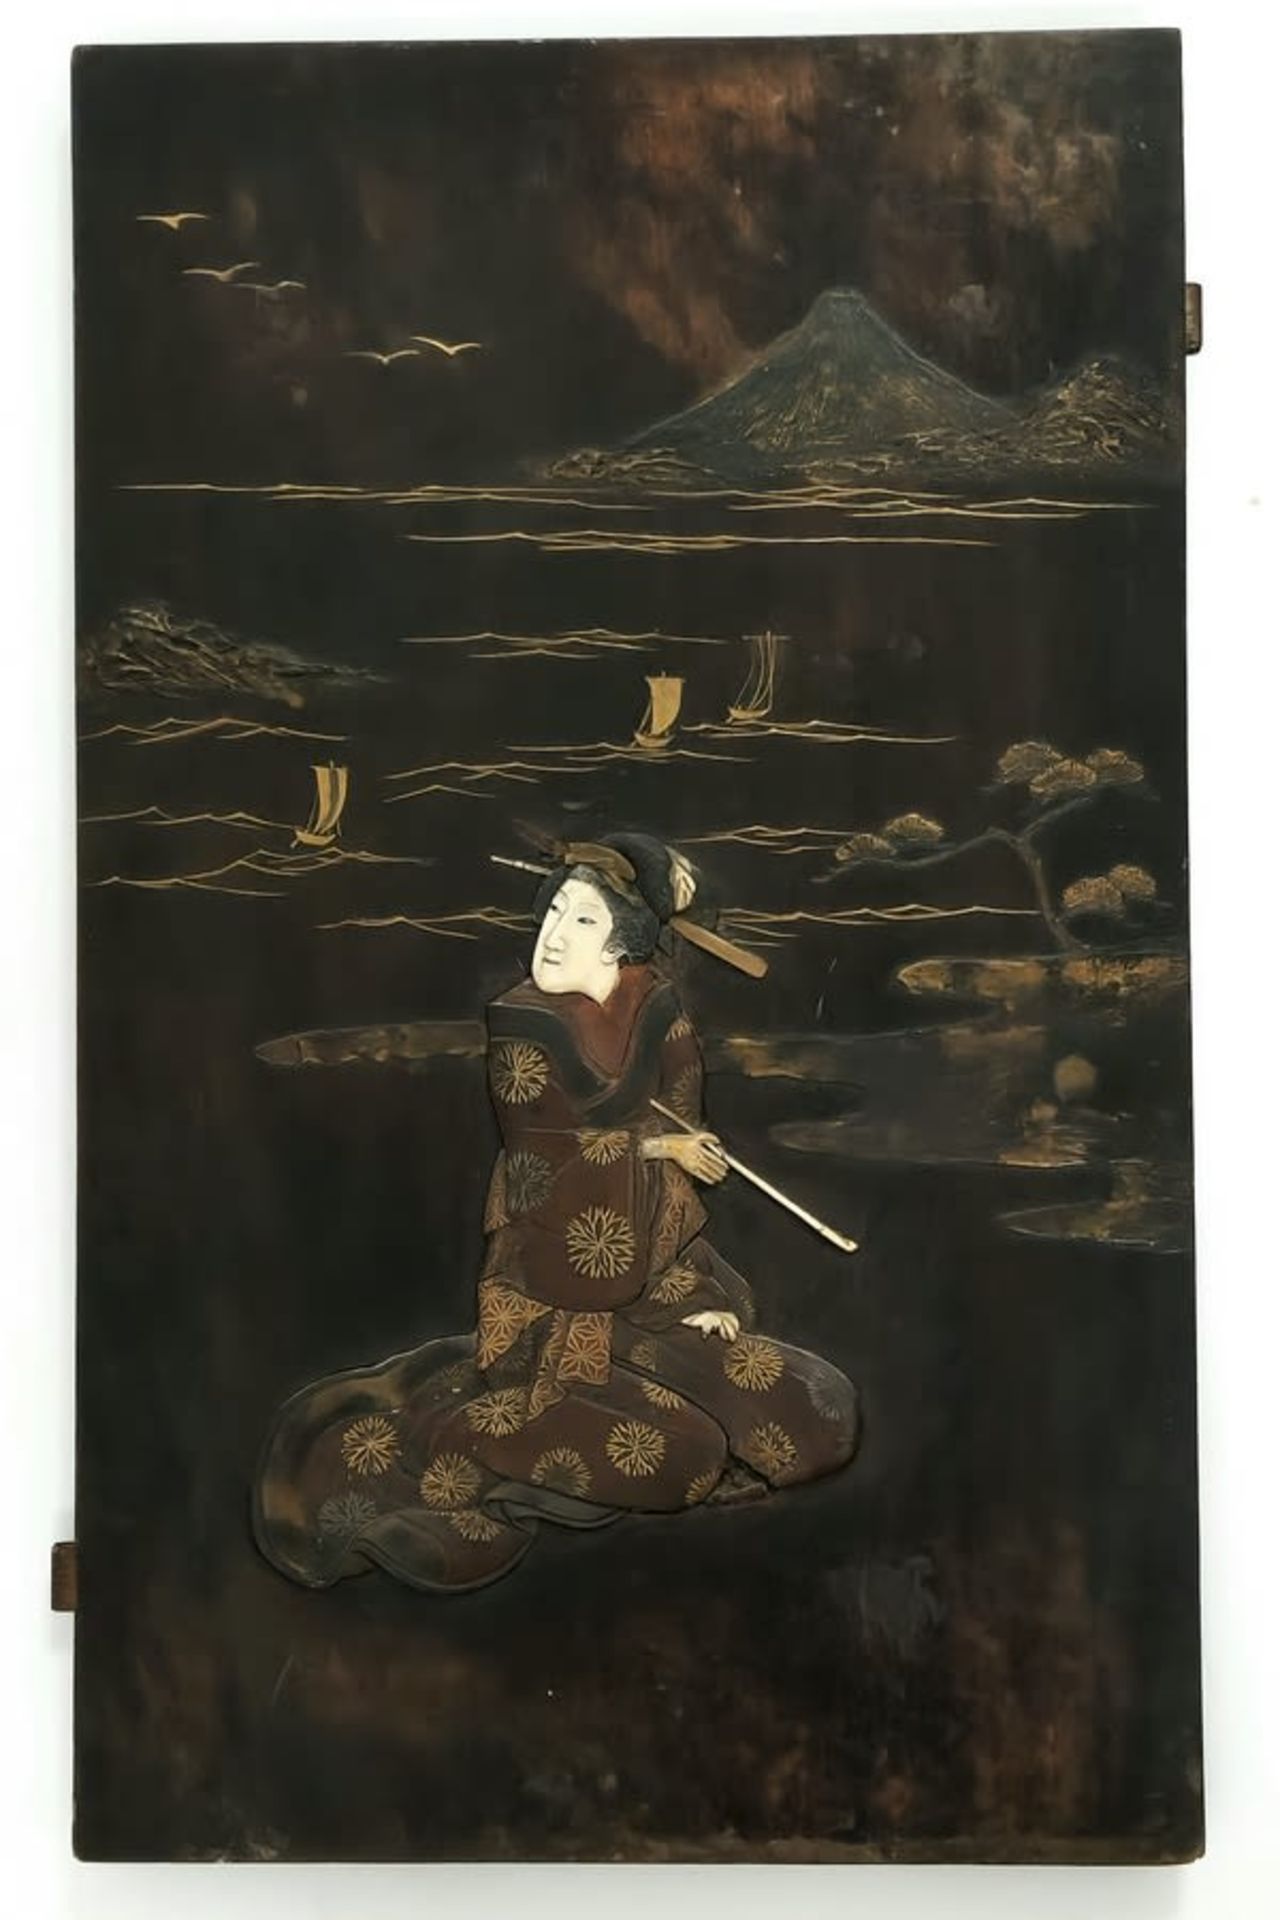 An antique Japanese wooden board from the end of the 19th century, from the Meiji Period, inlaid